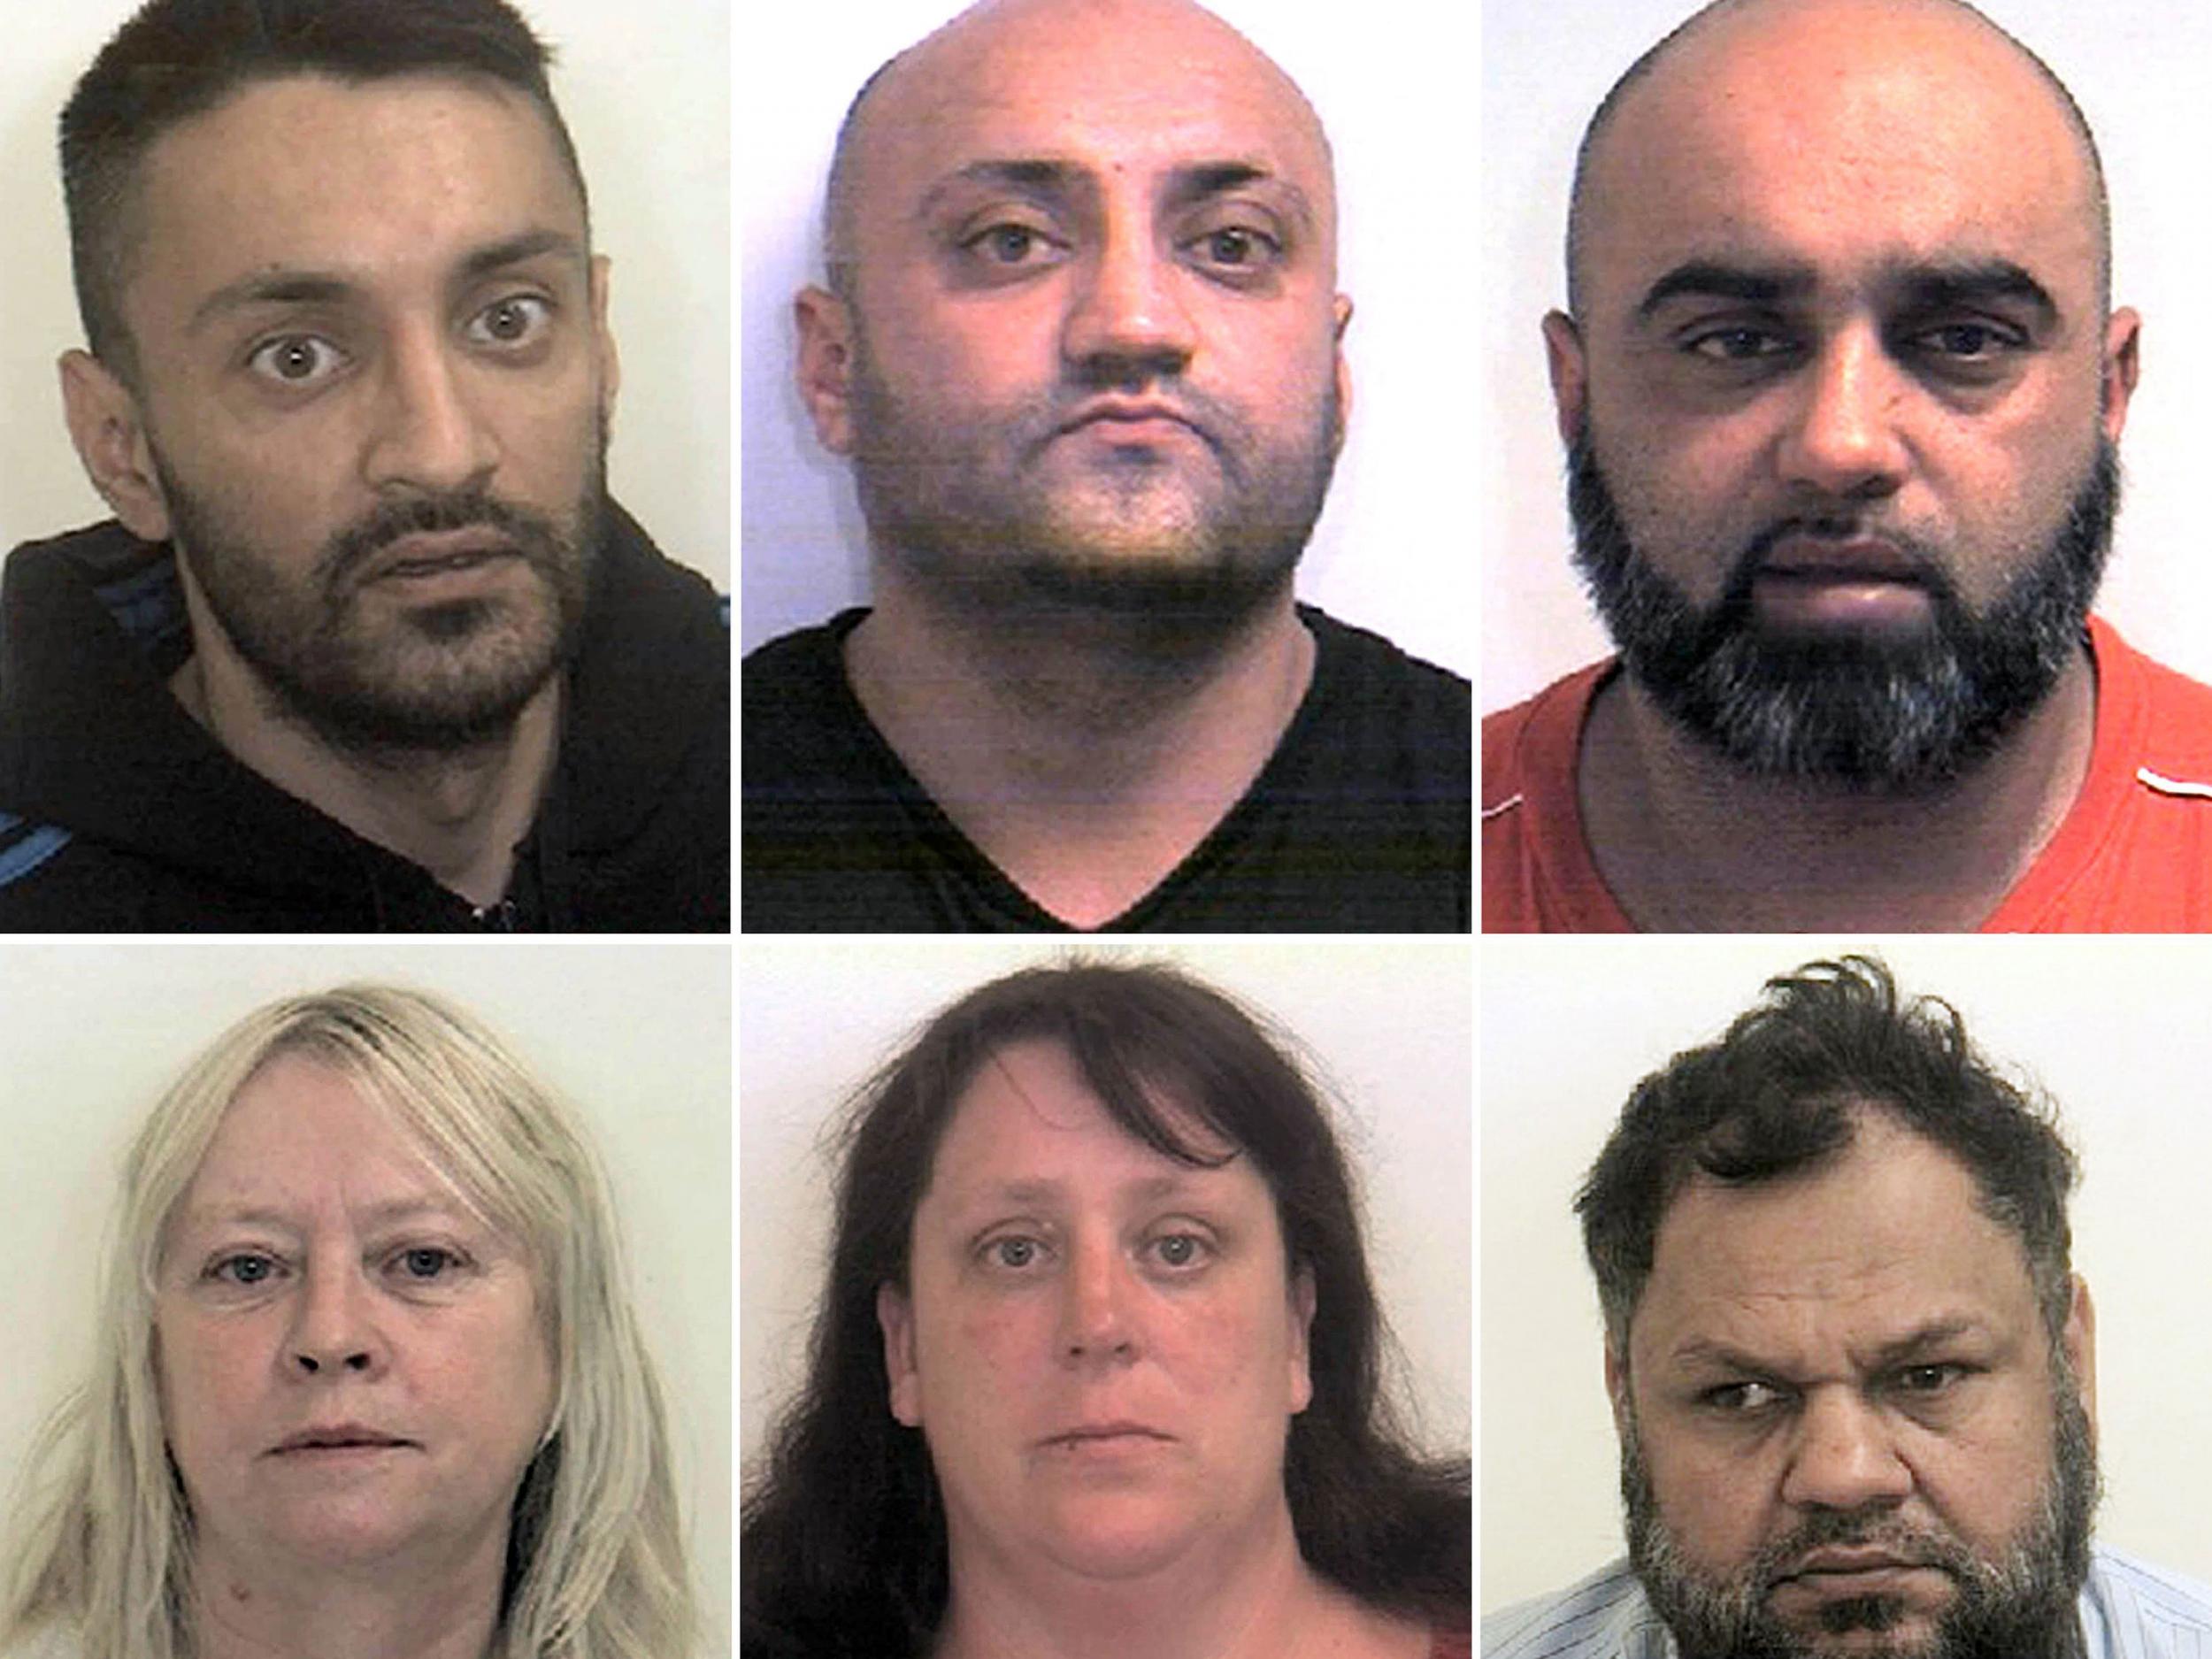 Brothers Arshid Hussain, 40, Basharat Hussain, 39, and Bannaras Hussain, 36, and (left to right bottom) Karen MacGregor, 58, (left), Shelley Davies, 40, and Qurban Ali, 53, were sentenced to a combined 103 years in prison